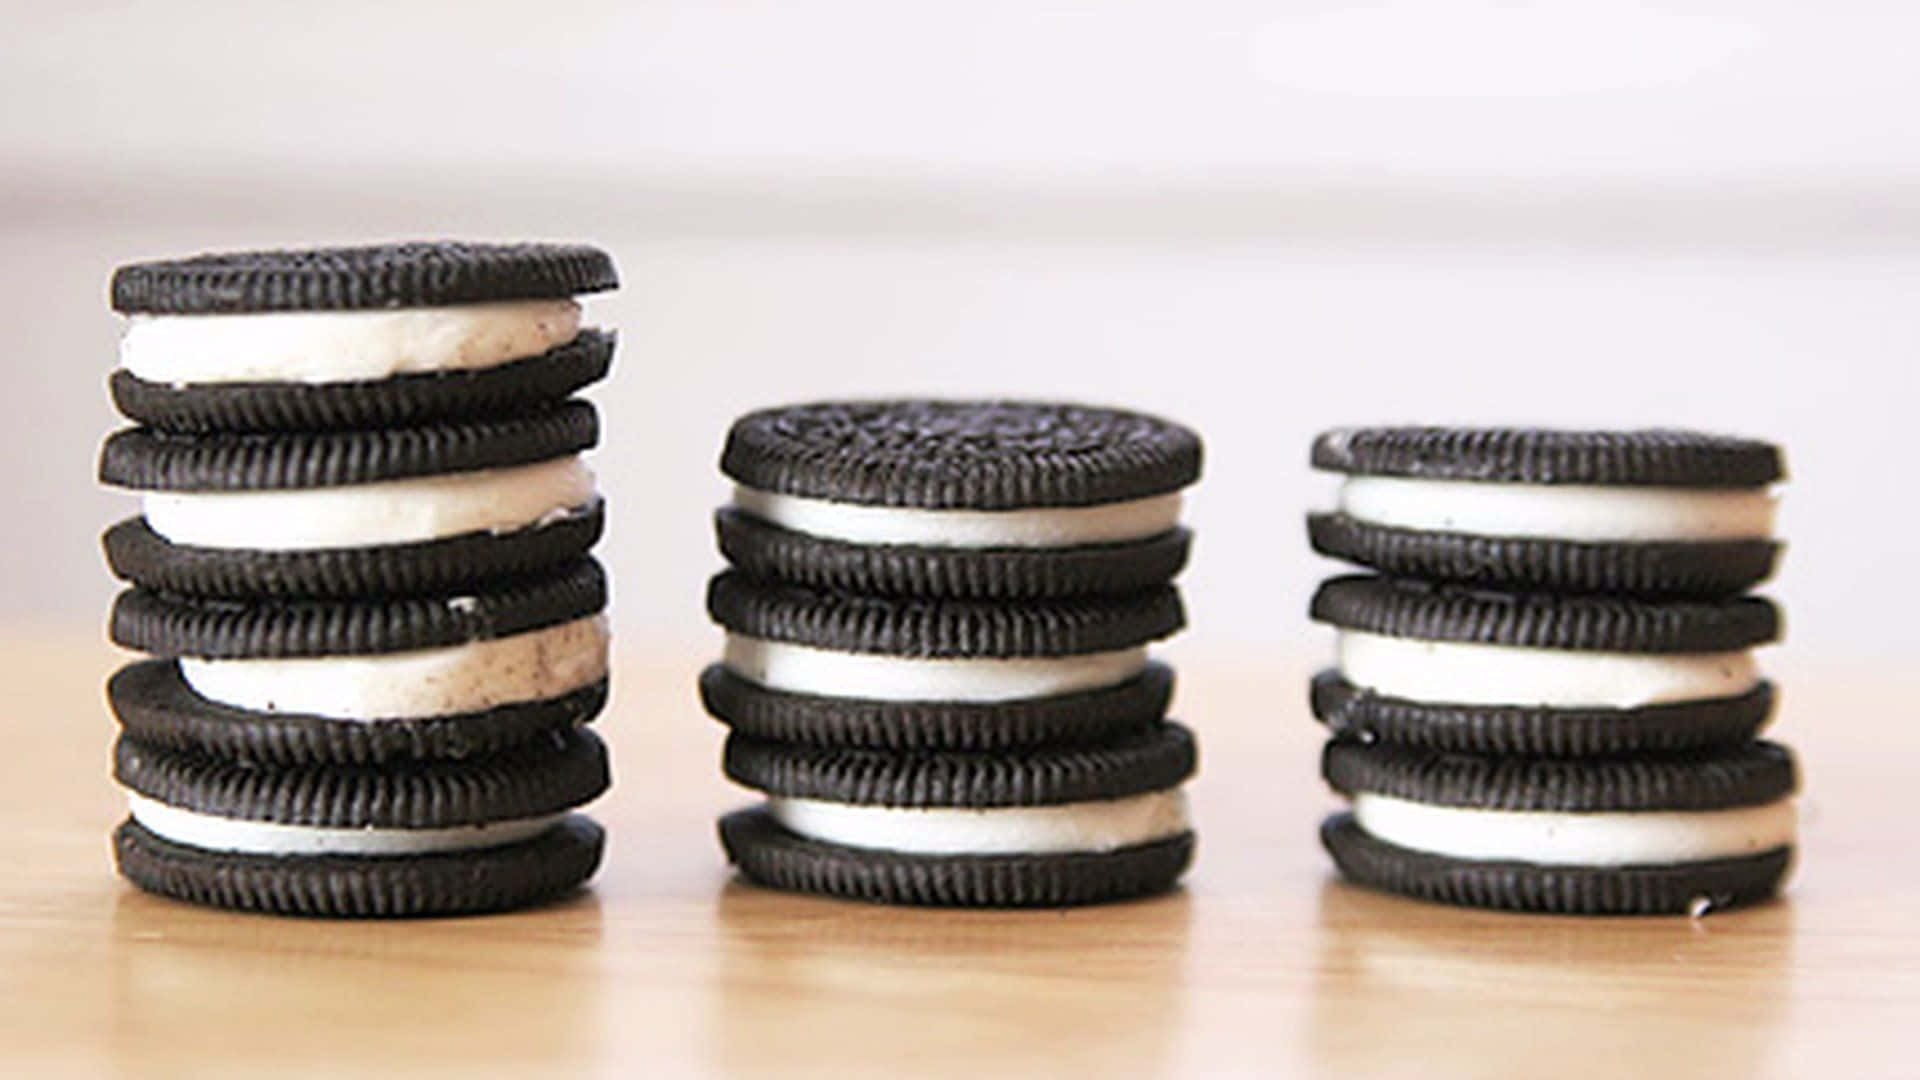 Three stacks of Oreo cookies are shown, with the middle stack being the tallest. - Oreo